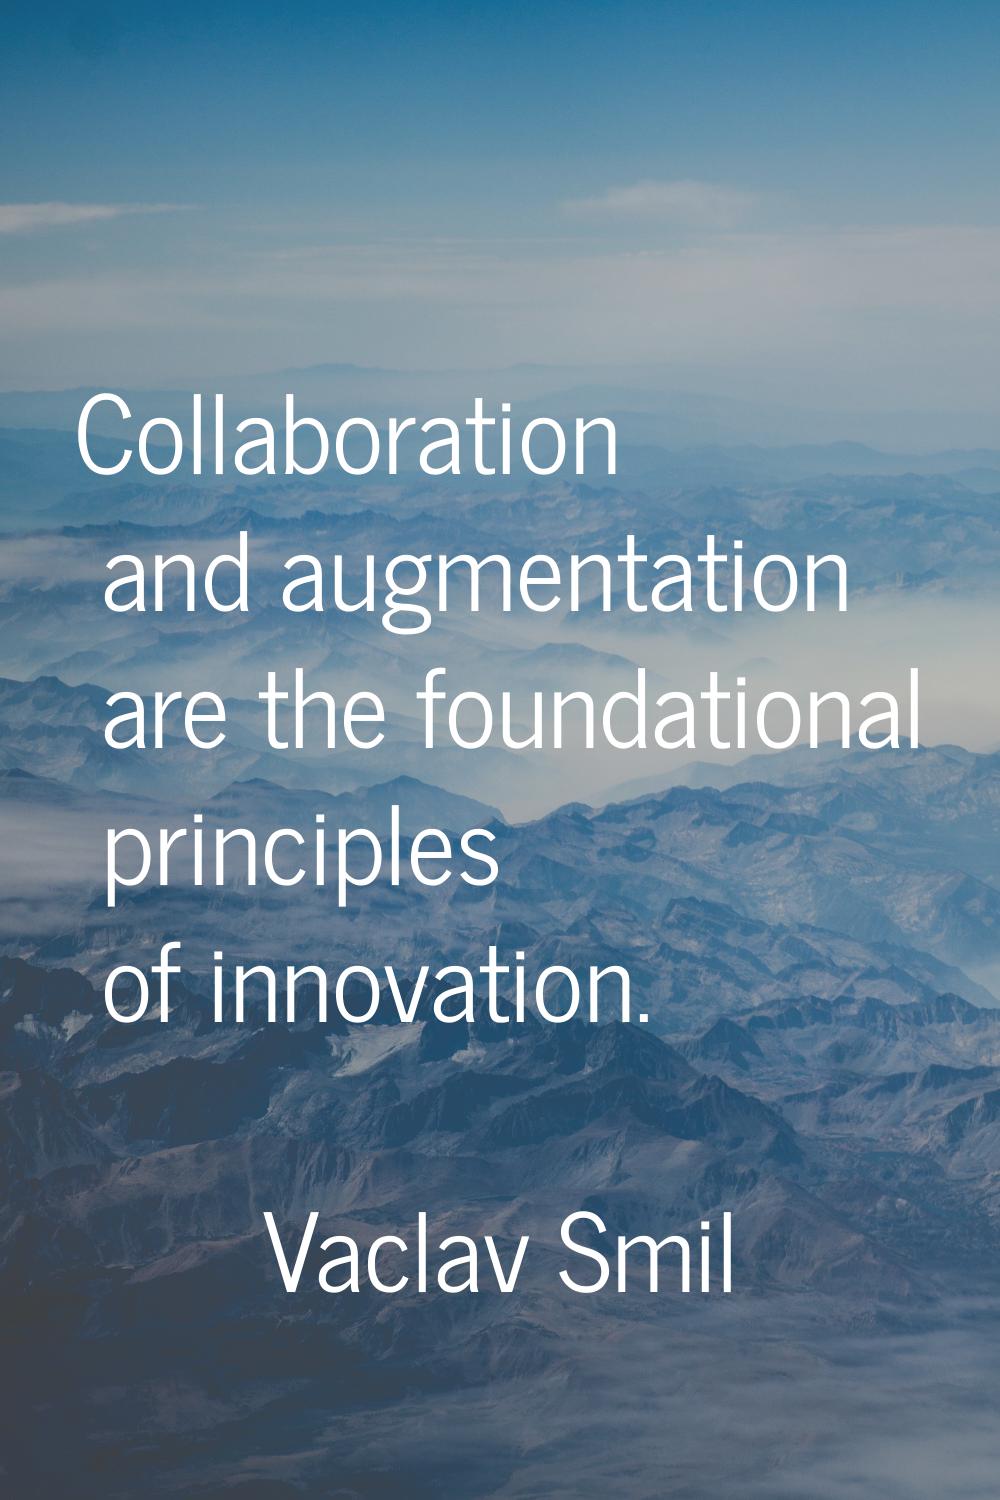 Collaboration and augmentation are the foundational principles of innovation.